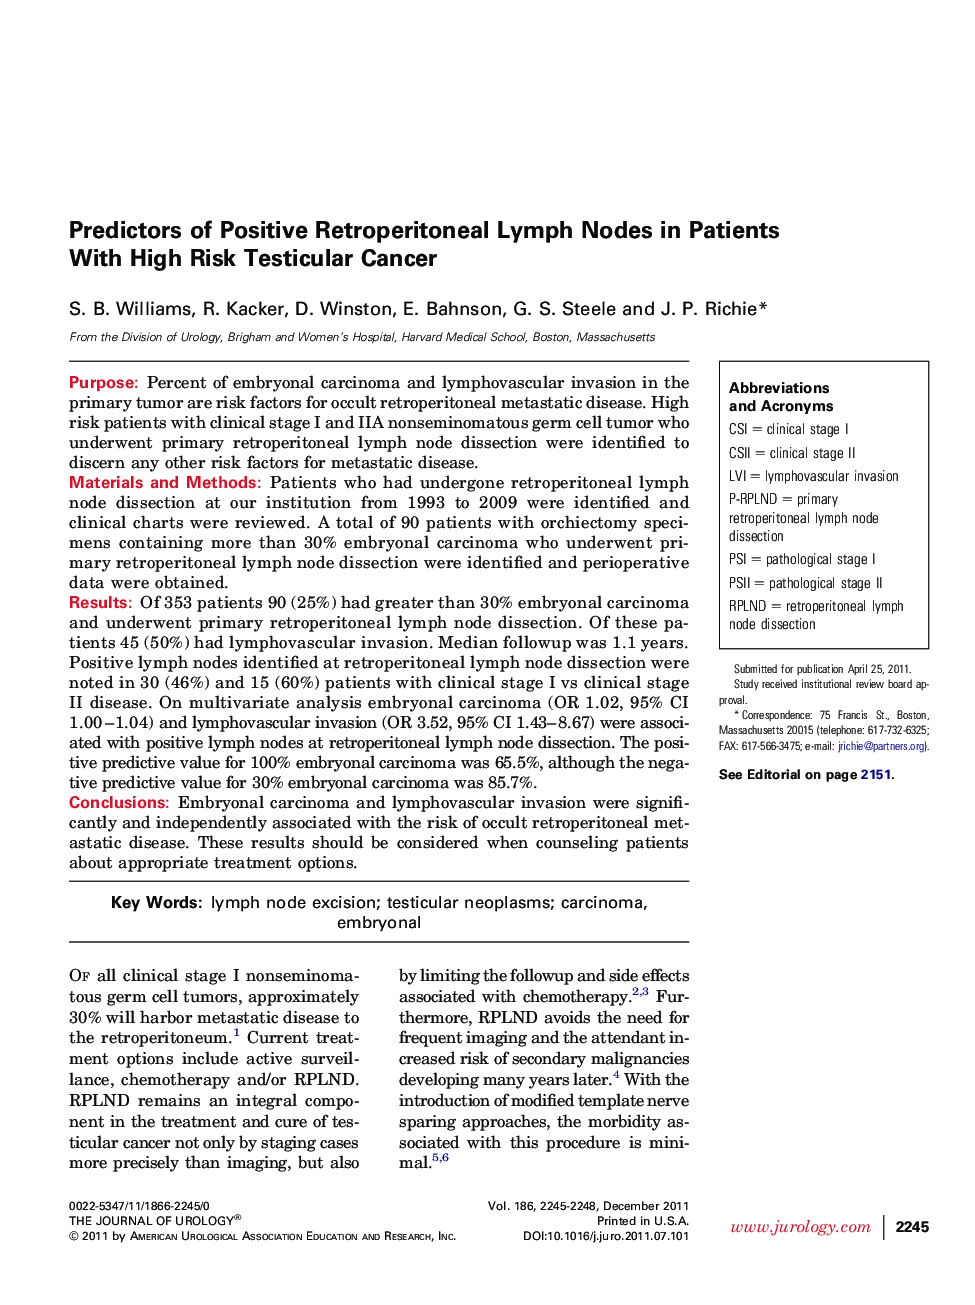 Predictors of Positive Retroperitoneal Lymph Nodes in Patients With High Risk Testicular Cancer 